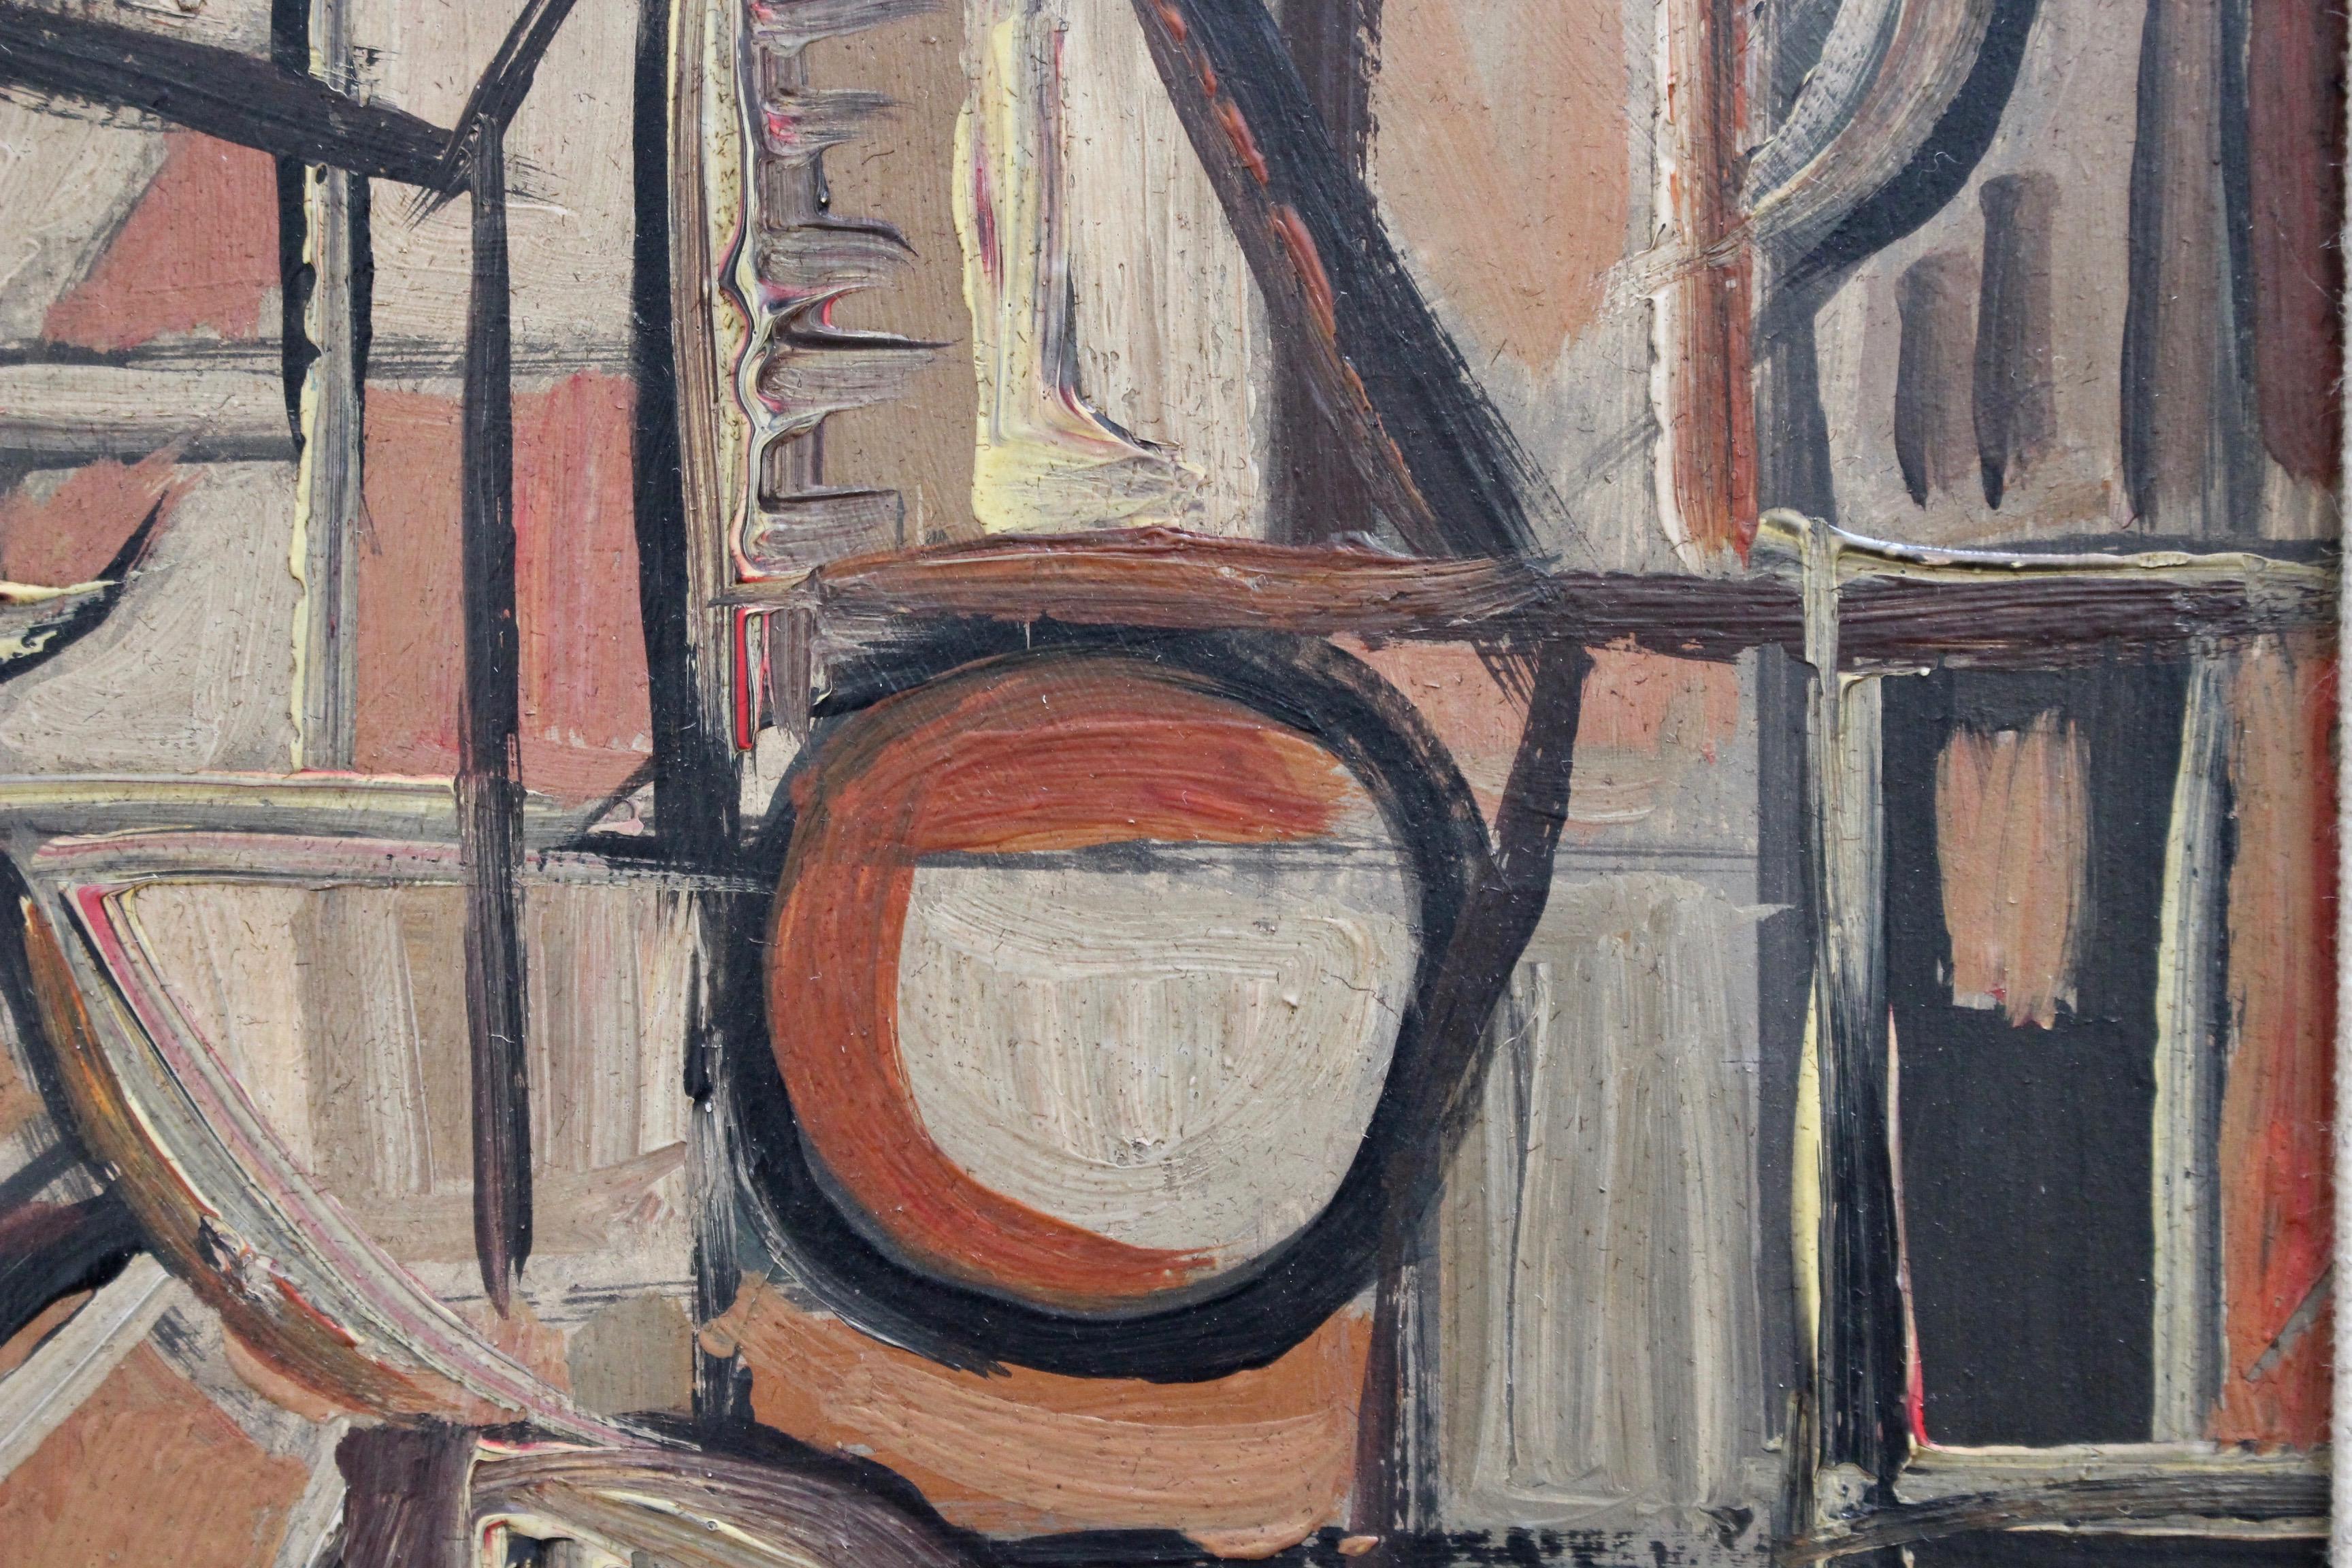 'Cubist Figure', oil on board, by STM (circa 1950s - 70s). A stunning Mid-Century Modern painting by artist with the initials STM. Clearly inspired by cubists Picasso and Braque, the artist uses angles, lines and subdued earth tones to create this